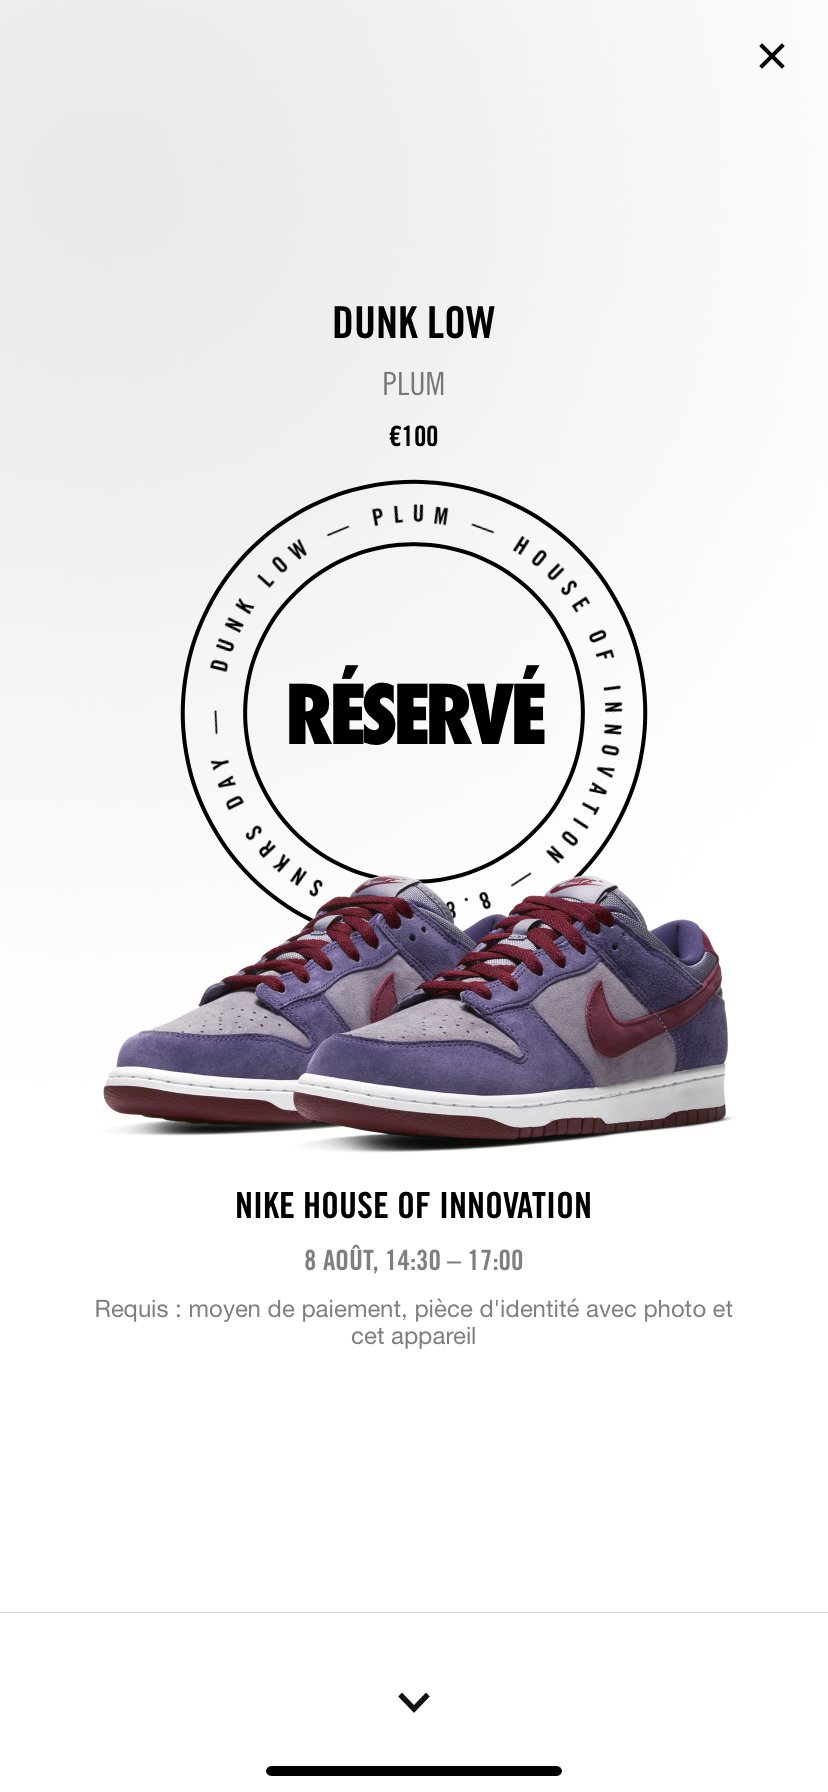 Stashed SNKRS on Twitter: "Nike Paris is dropping pairs via SNKRS Passes that are only accessible to people in a specific zone (like we It's pretty much a SNKRS Stash but